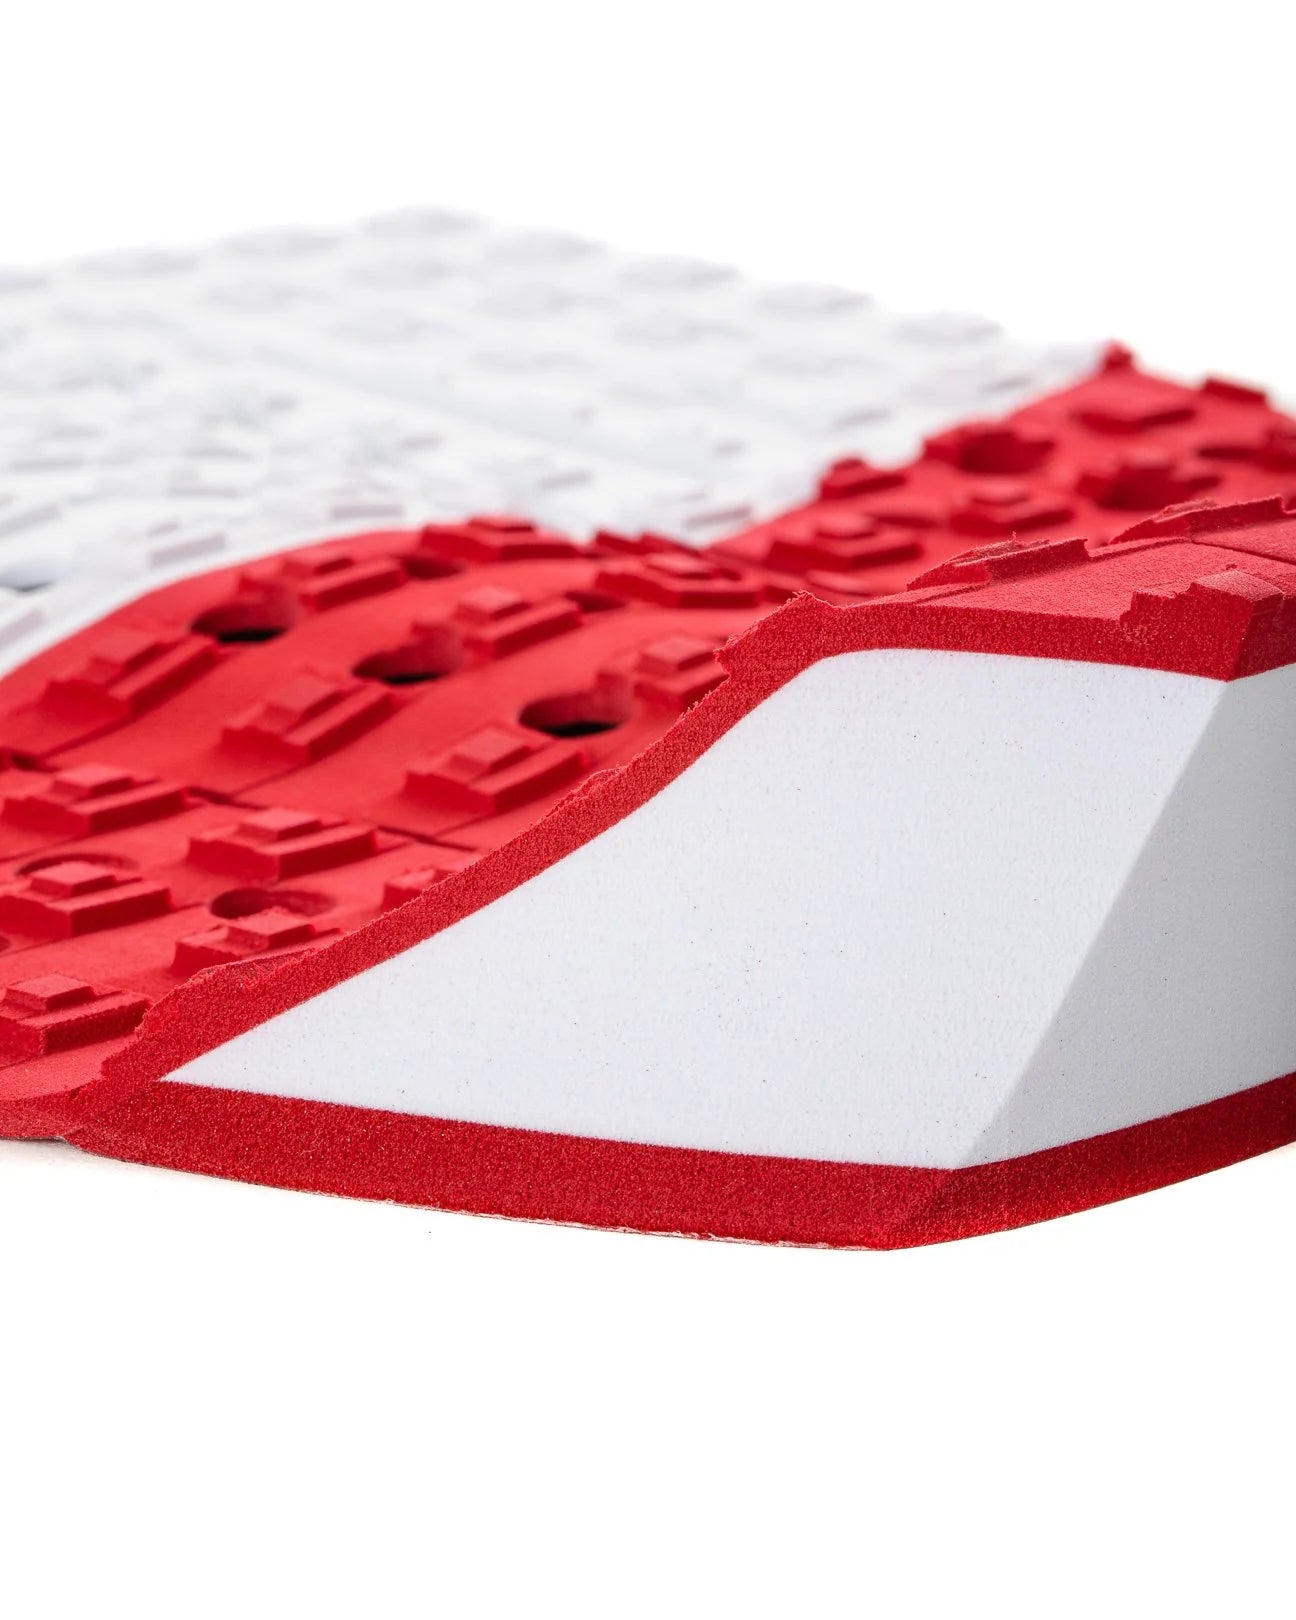 TRACTION PAD CREATURES - RELIANCE III BLOCK RED/WHITE